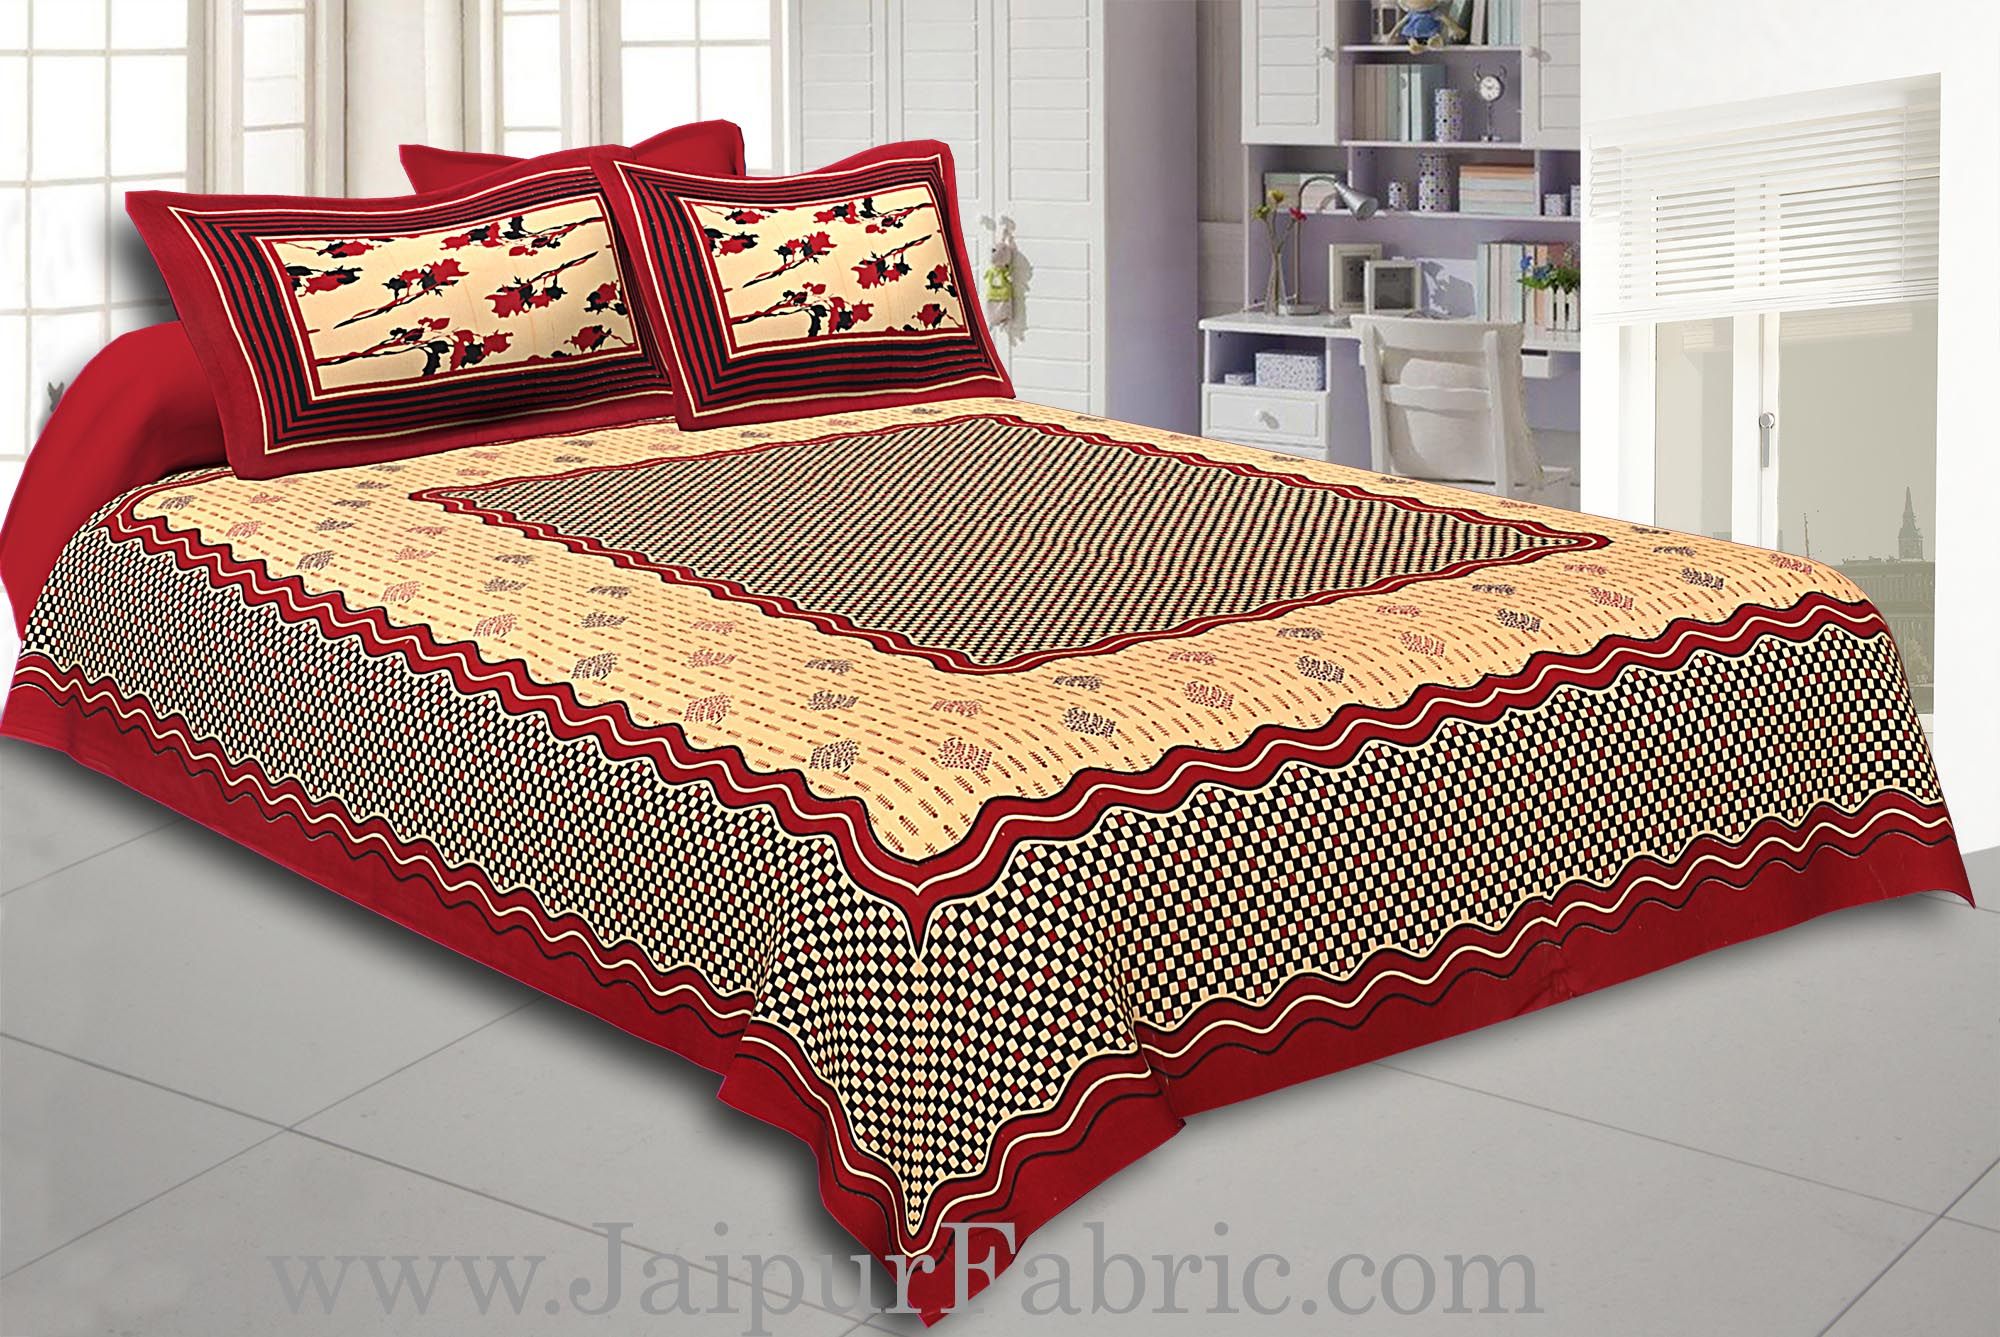 Maroon Border Cream Base With Small Maroon And Black Checks  Bagru Print Cotton Double Bedsheet